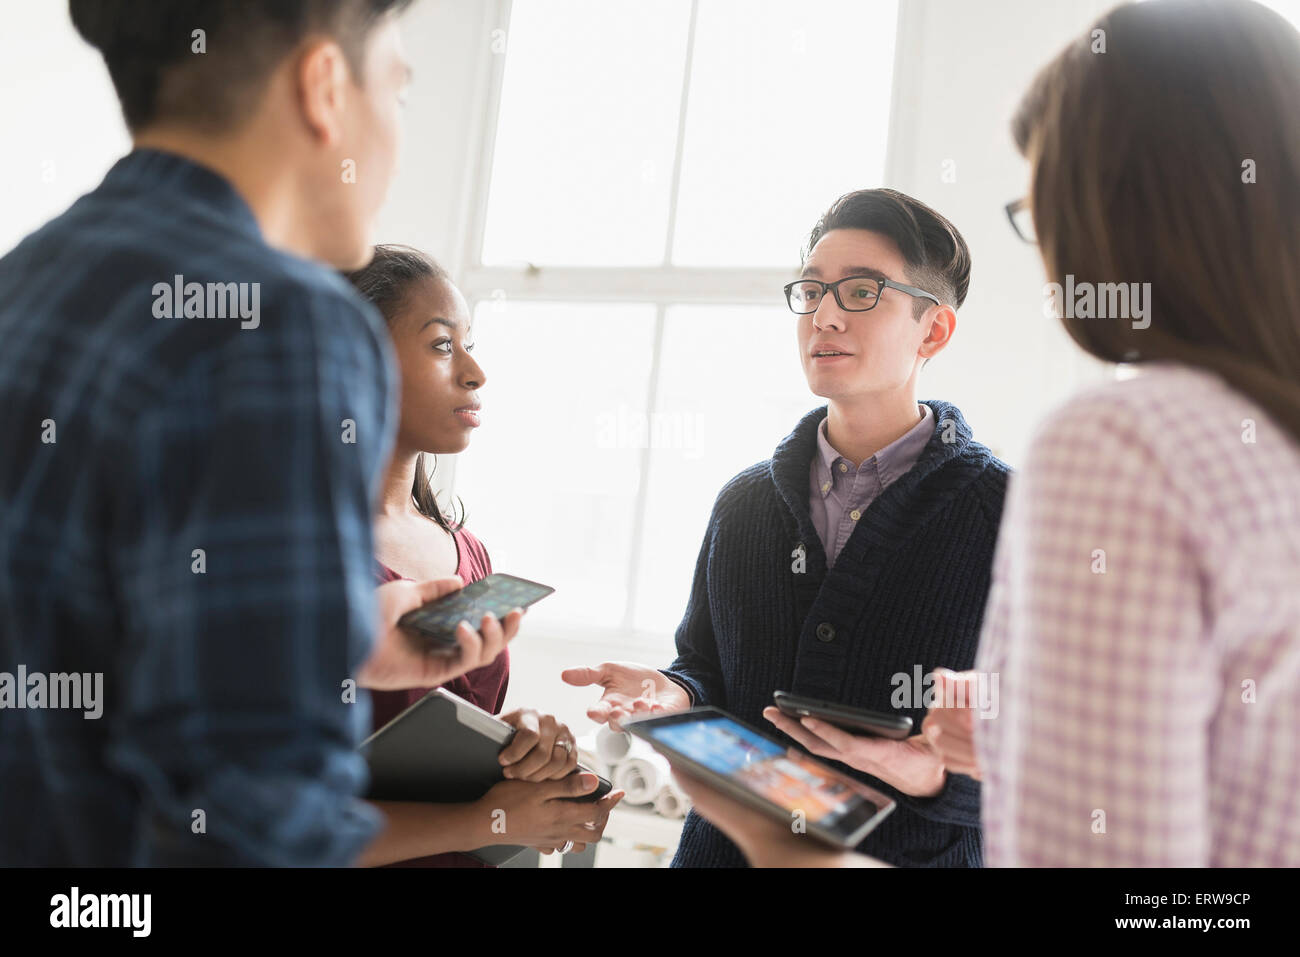 Business people working together in office with technology Stock Photo